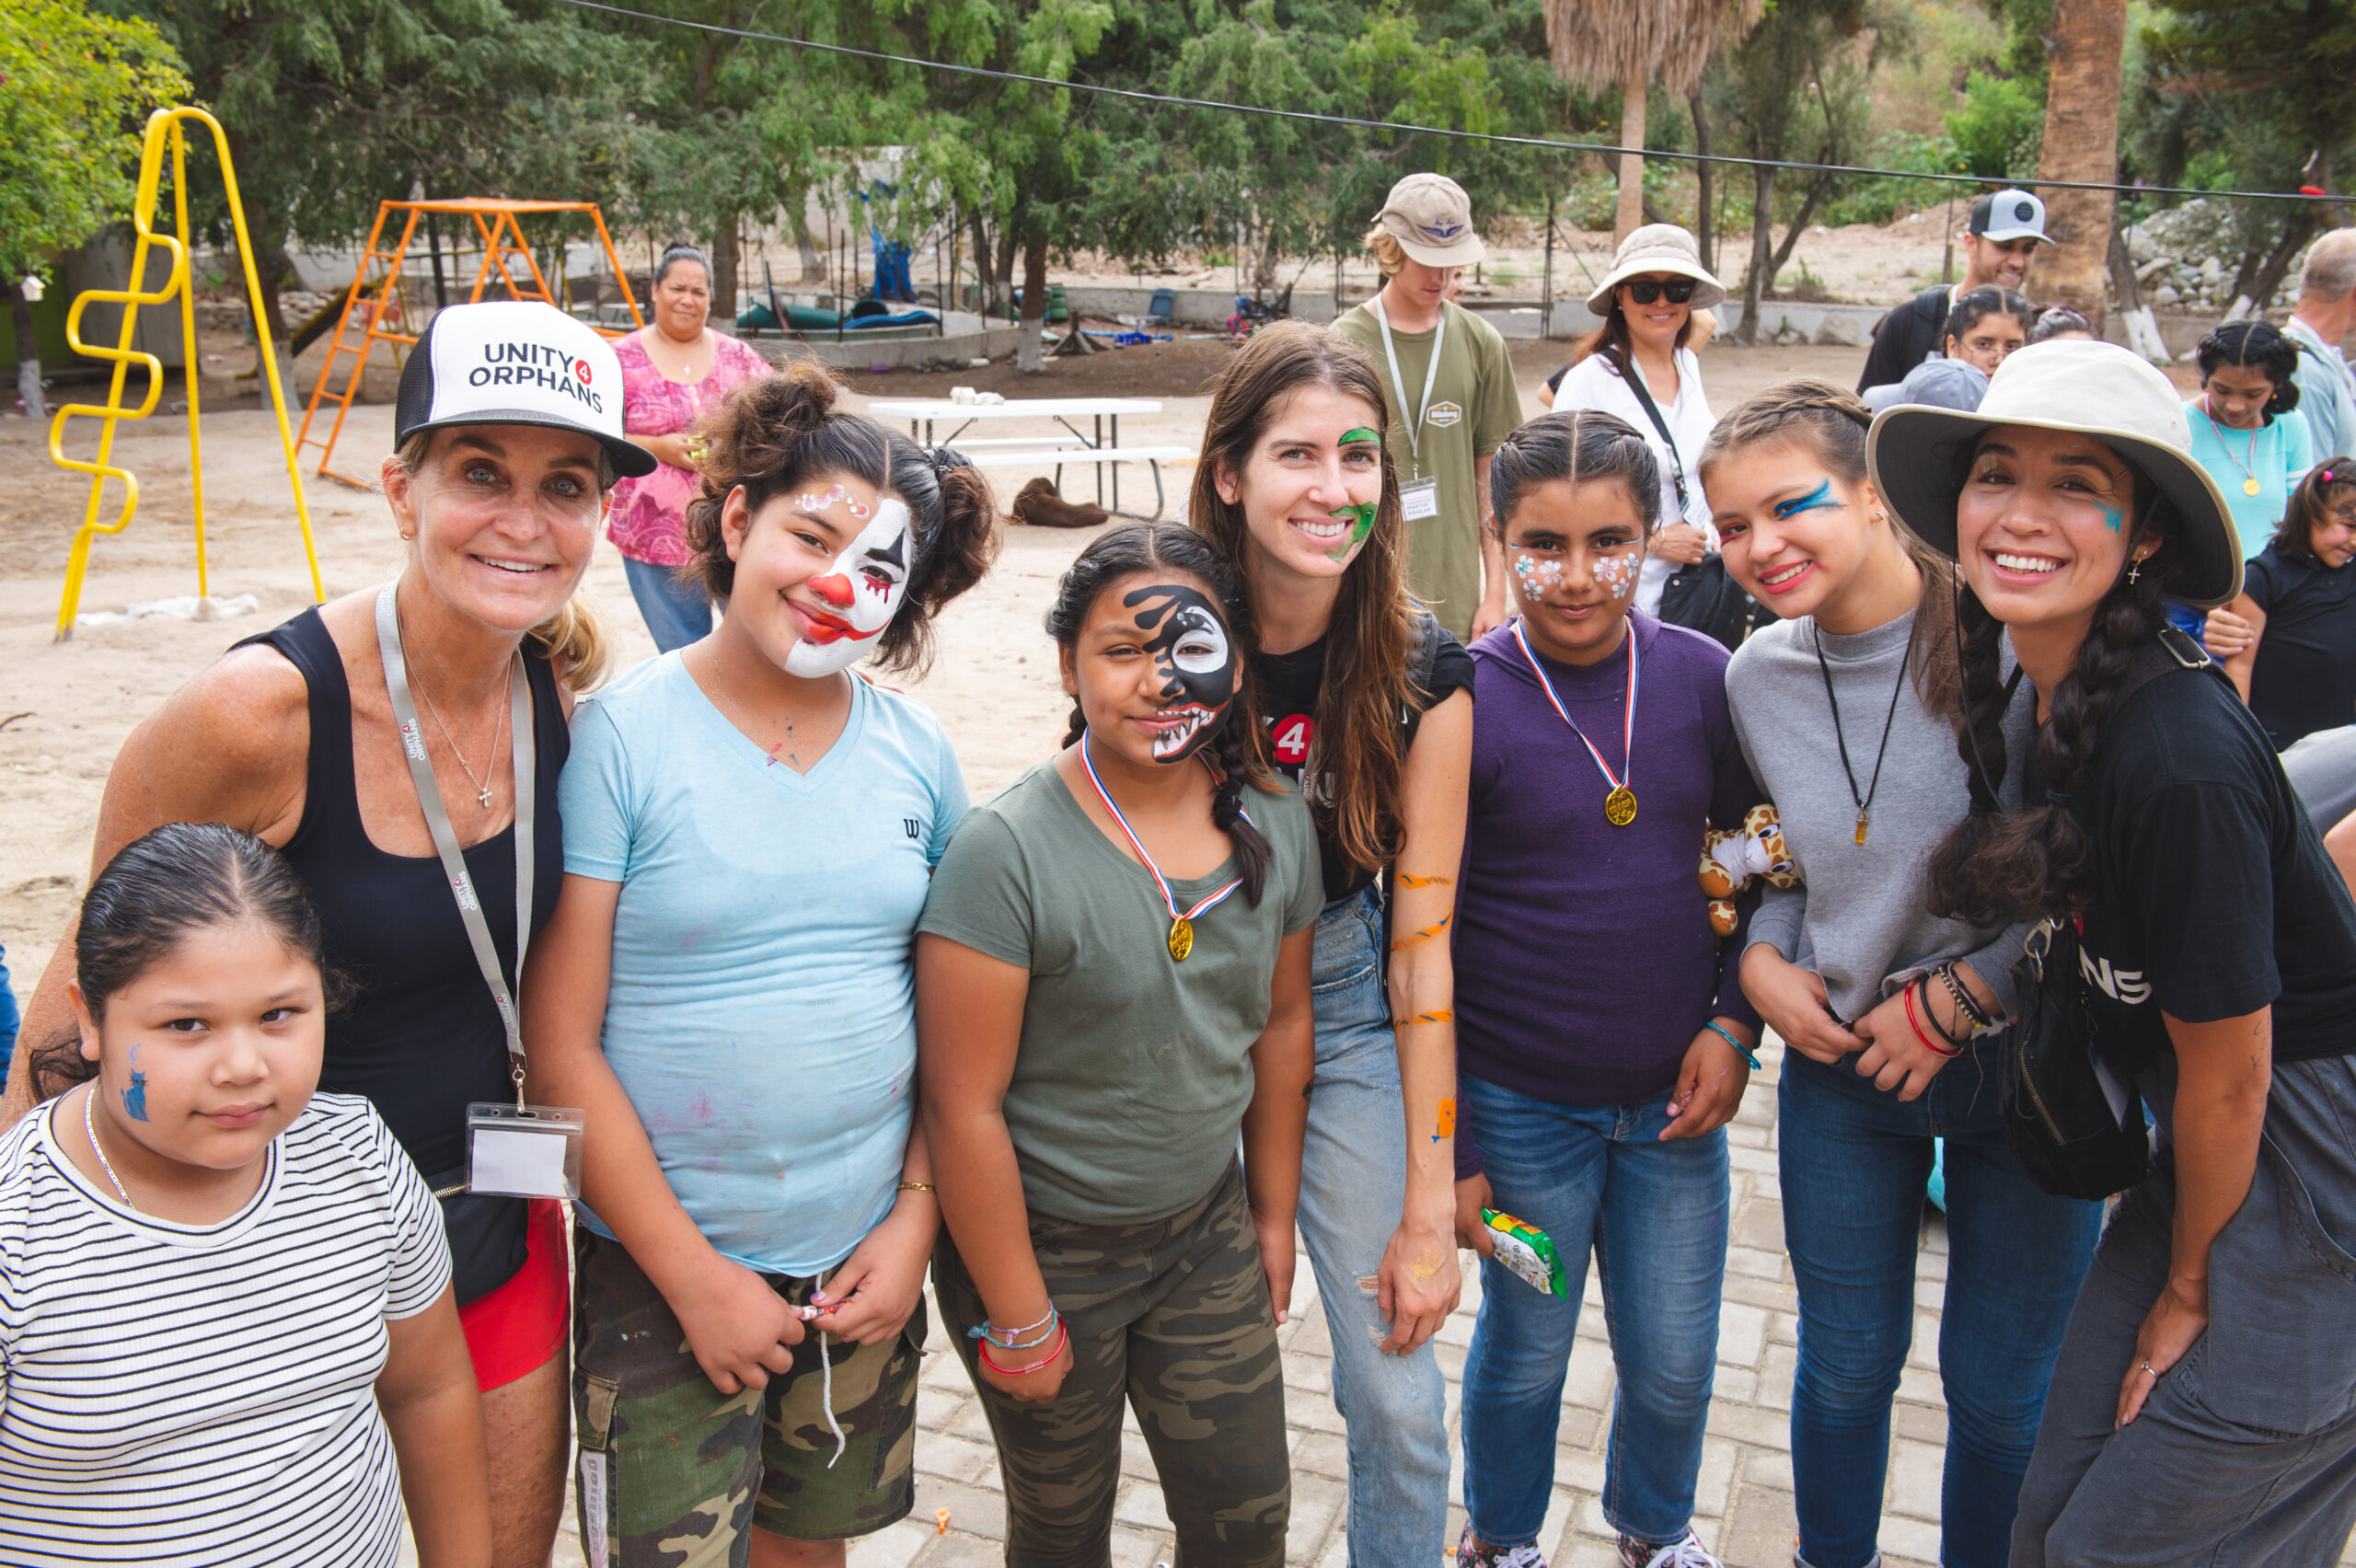 San Diego charity Unity 4 Orphans staff with children who have their faces painted